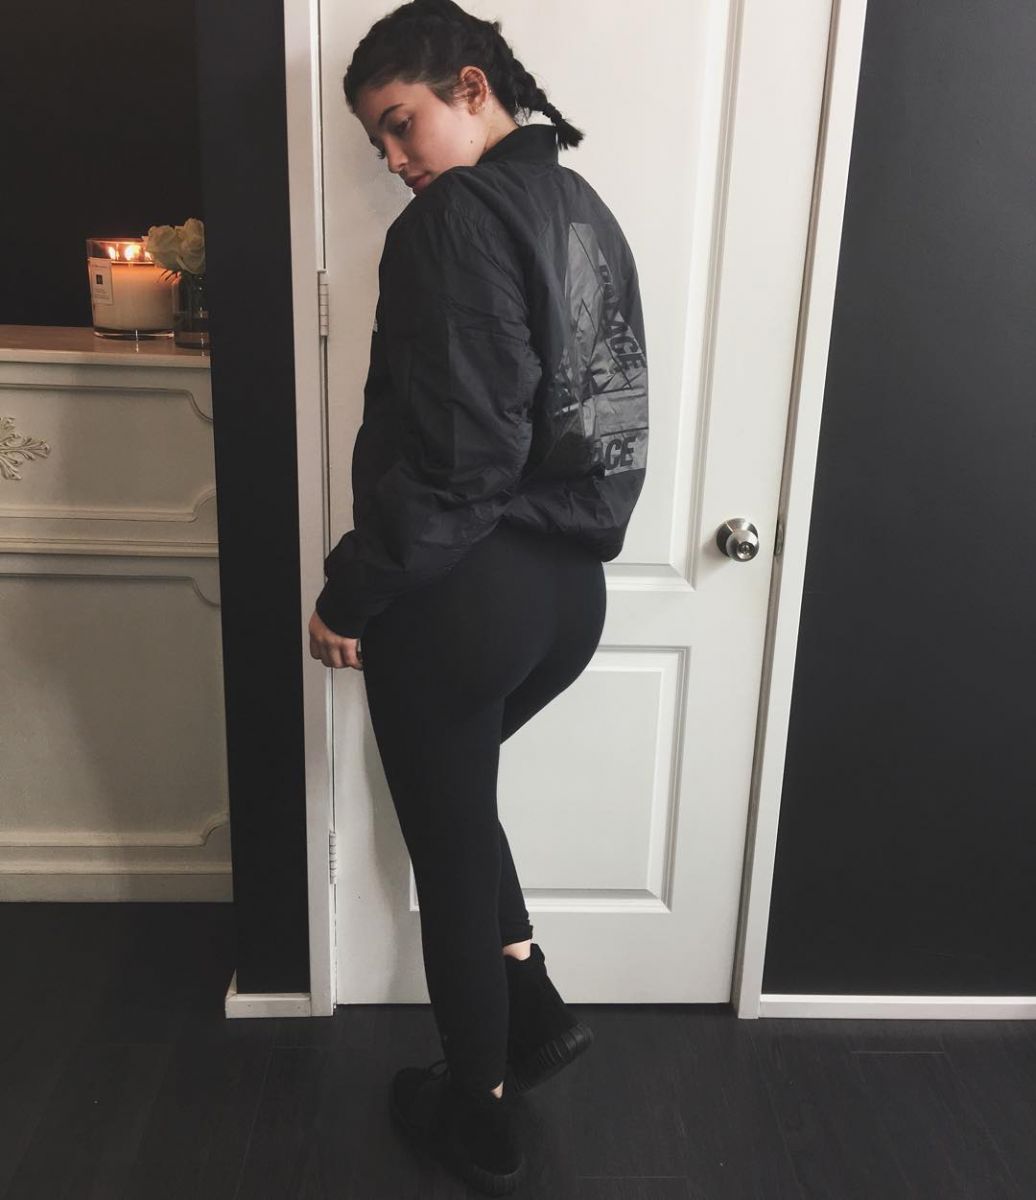 Kylie Jenner wearing the &#x27;Core Black&#x27; adidas Yeezy 750 Boost